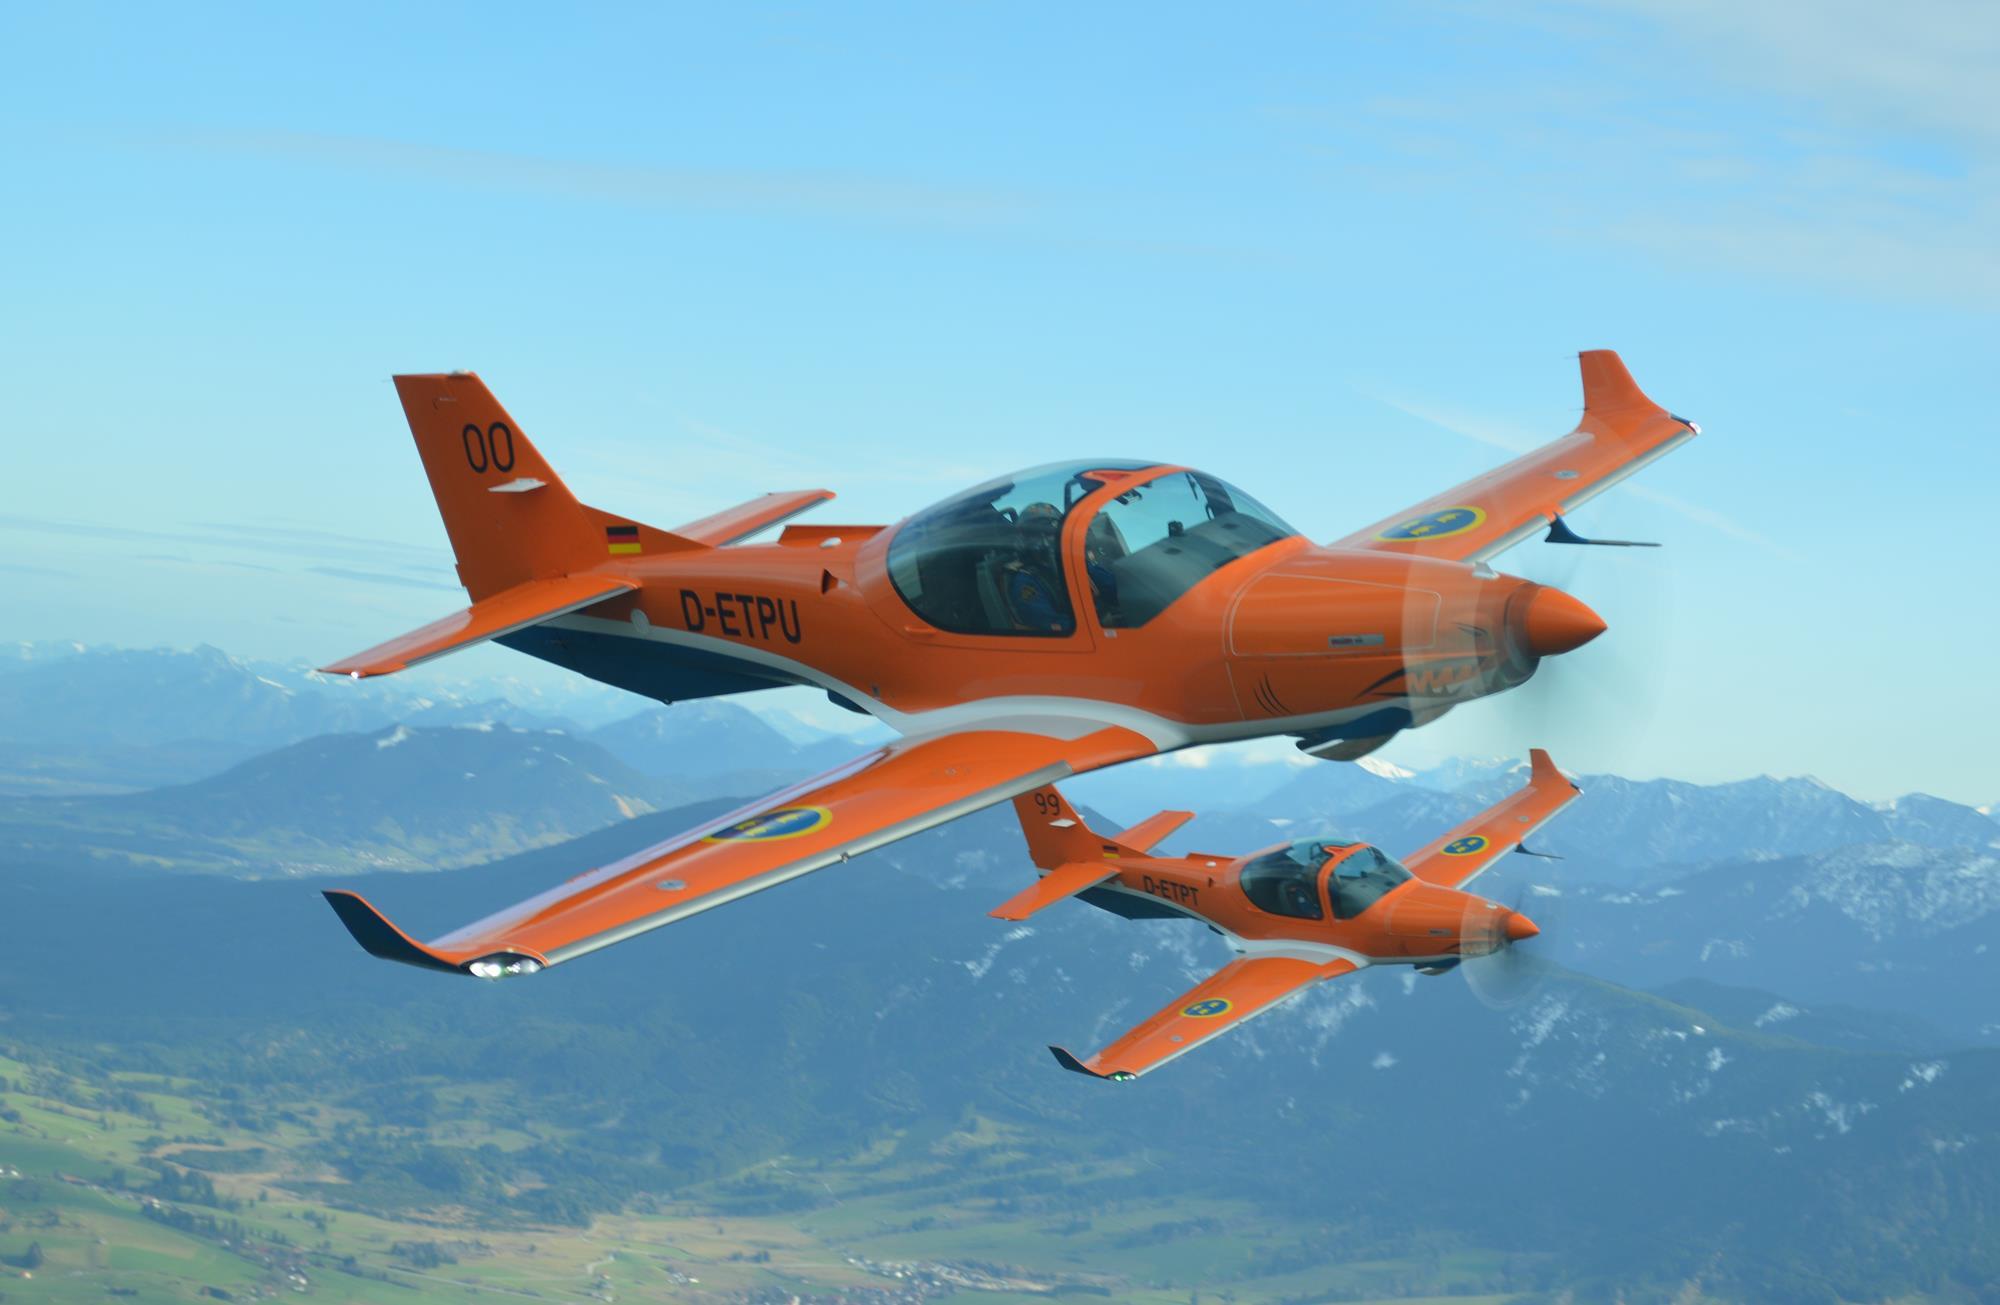 Sweden orders Grob 120TP as new basic trainer